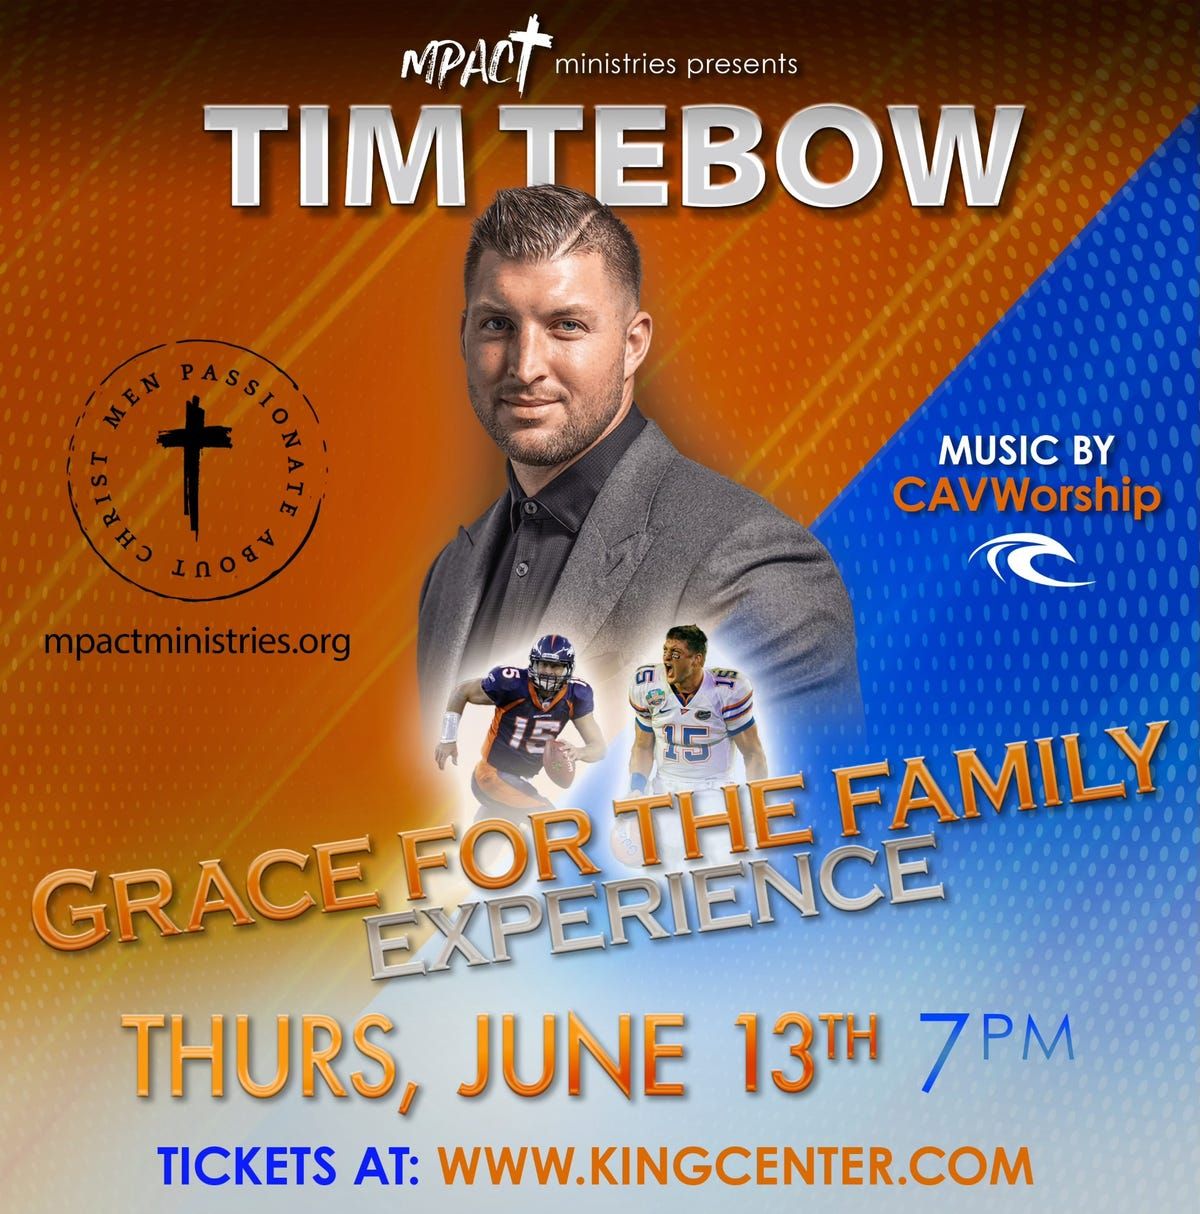 Tim Tebow - Grace for the Family Experience